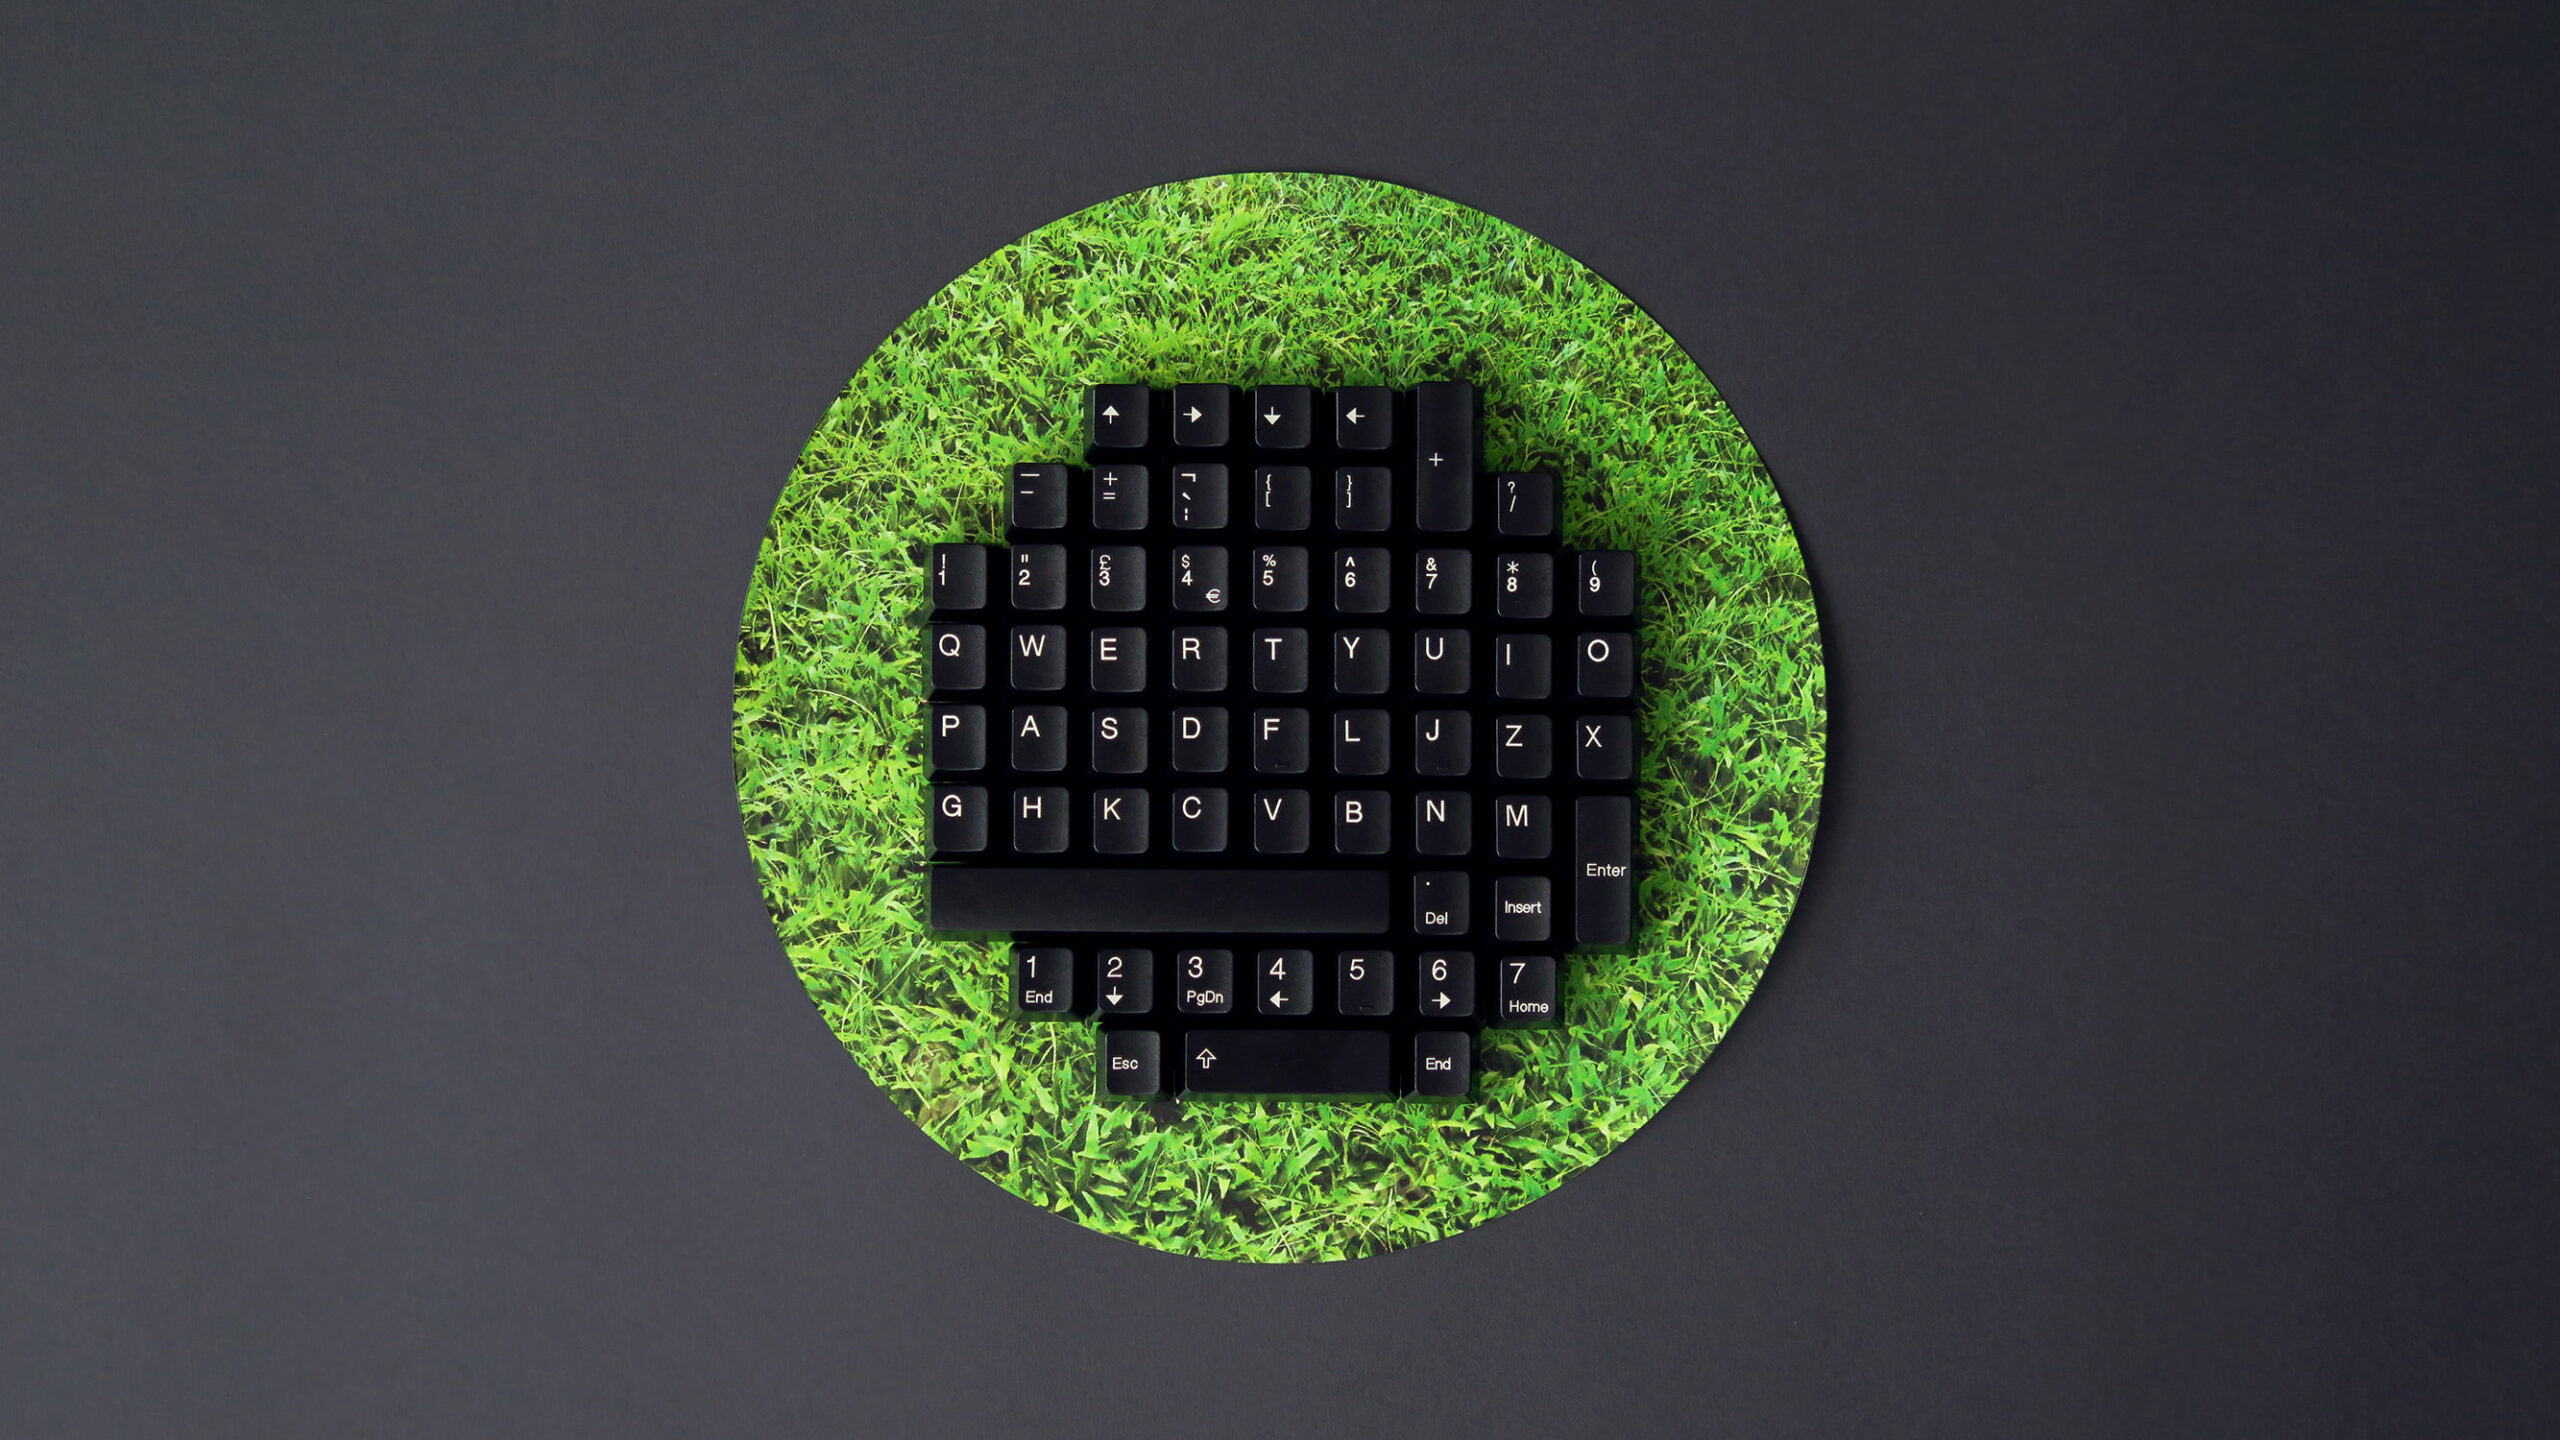 Picture of a circular keyboard juxtaposed against a slightly larger grass circle